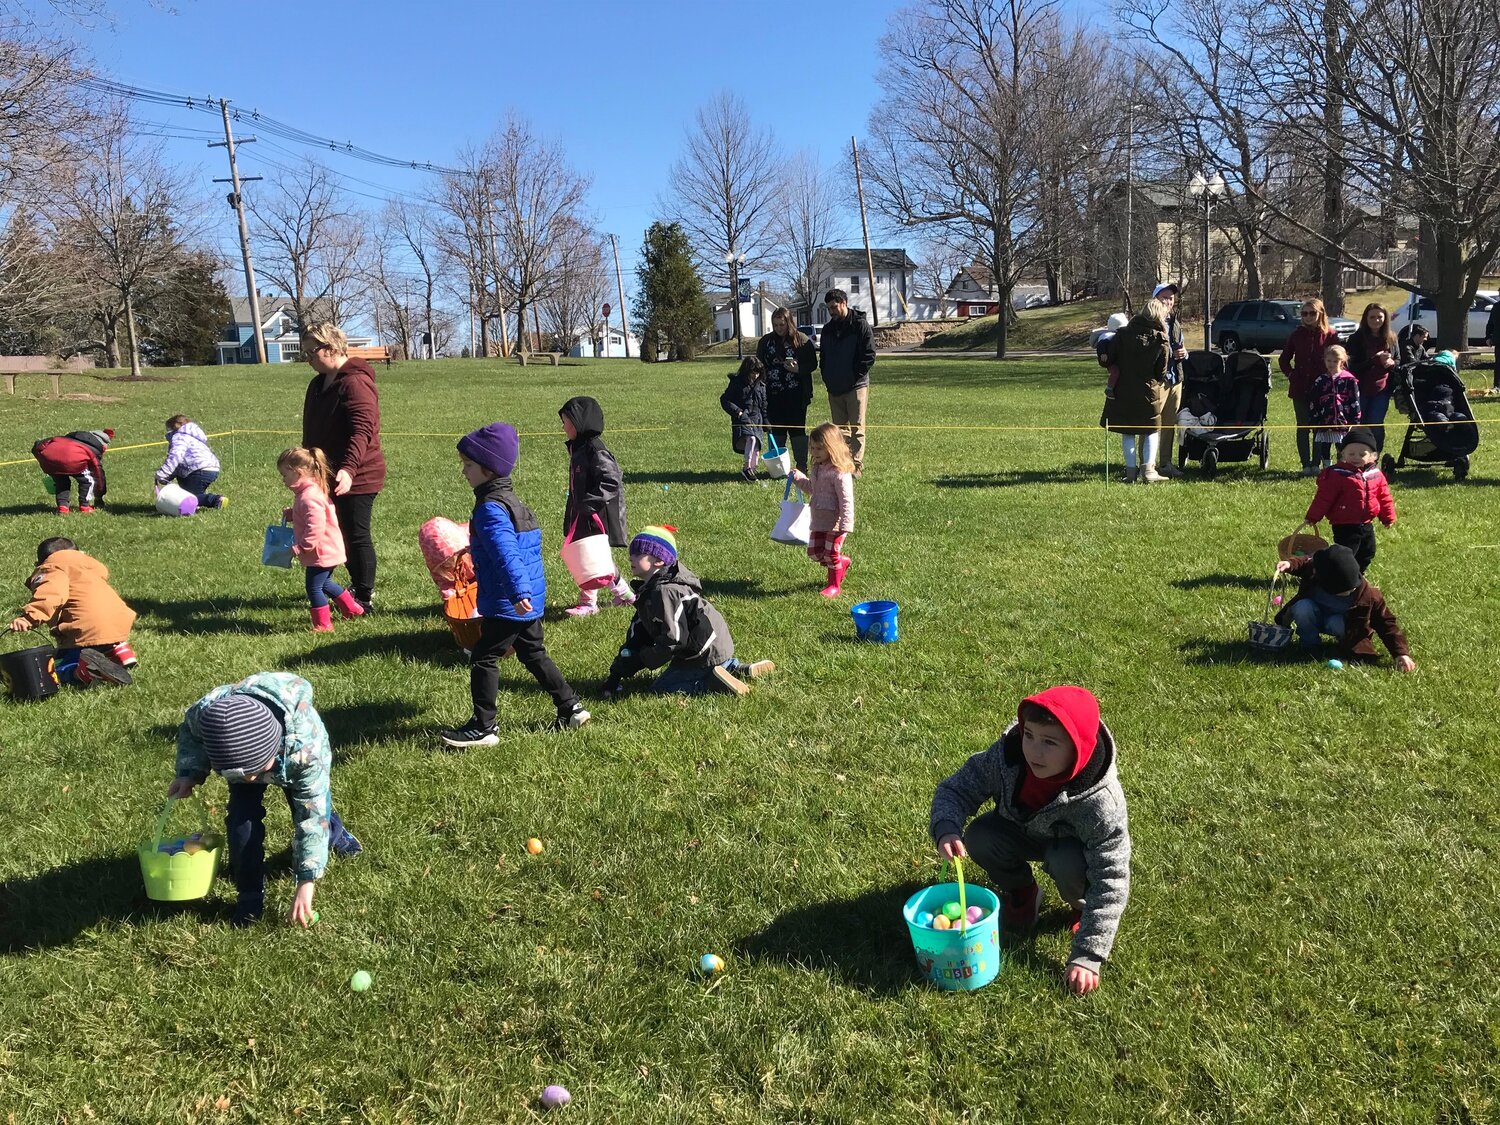 Area youngsters pick the Reilly-Mumford Memorial Park clean of plastic eggs Saturday, April 8 during the annual Easter Egg Hunt in Sherrill.